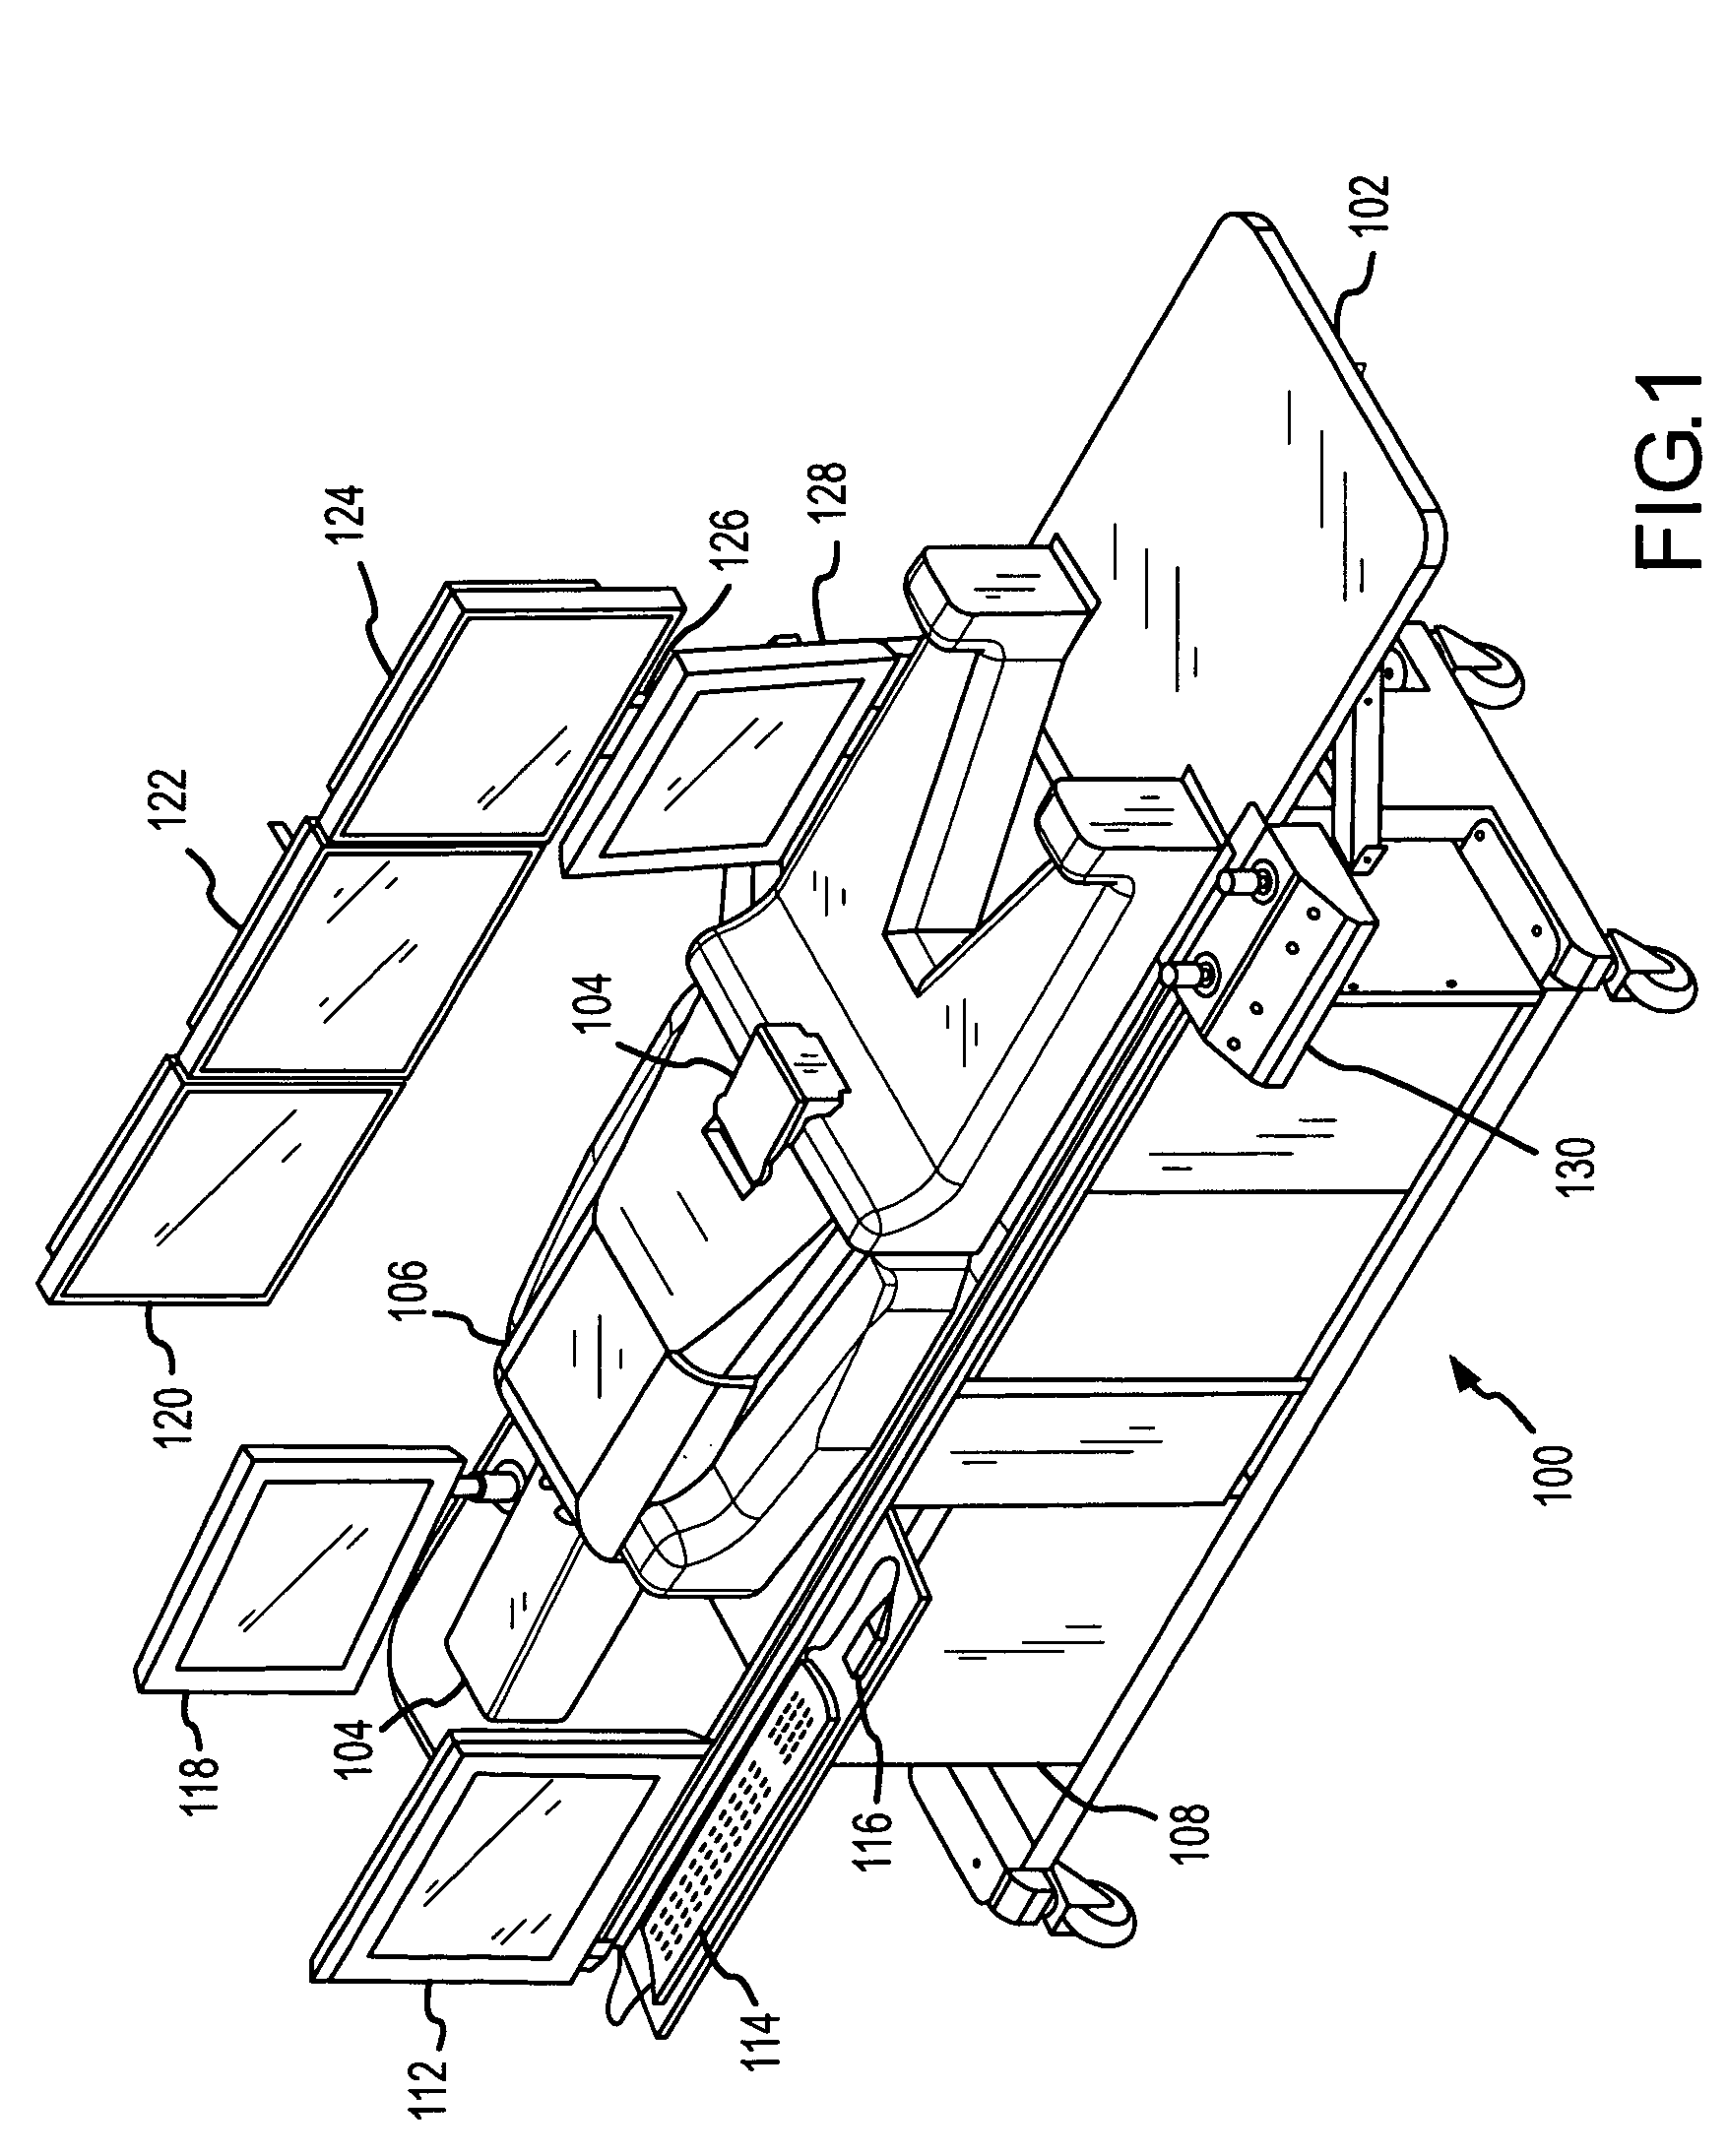 Medical simulation system and method